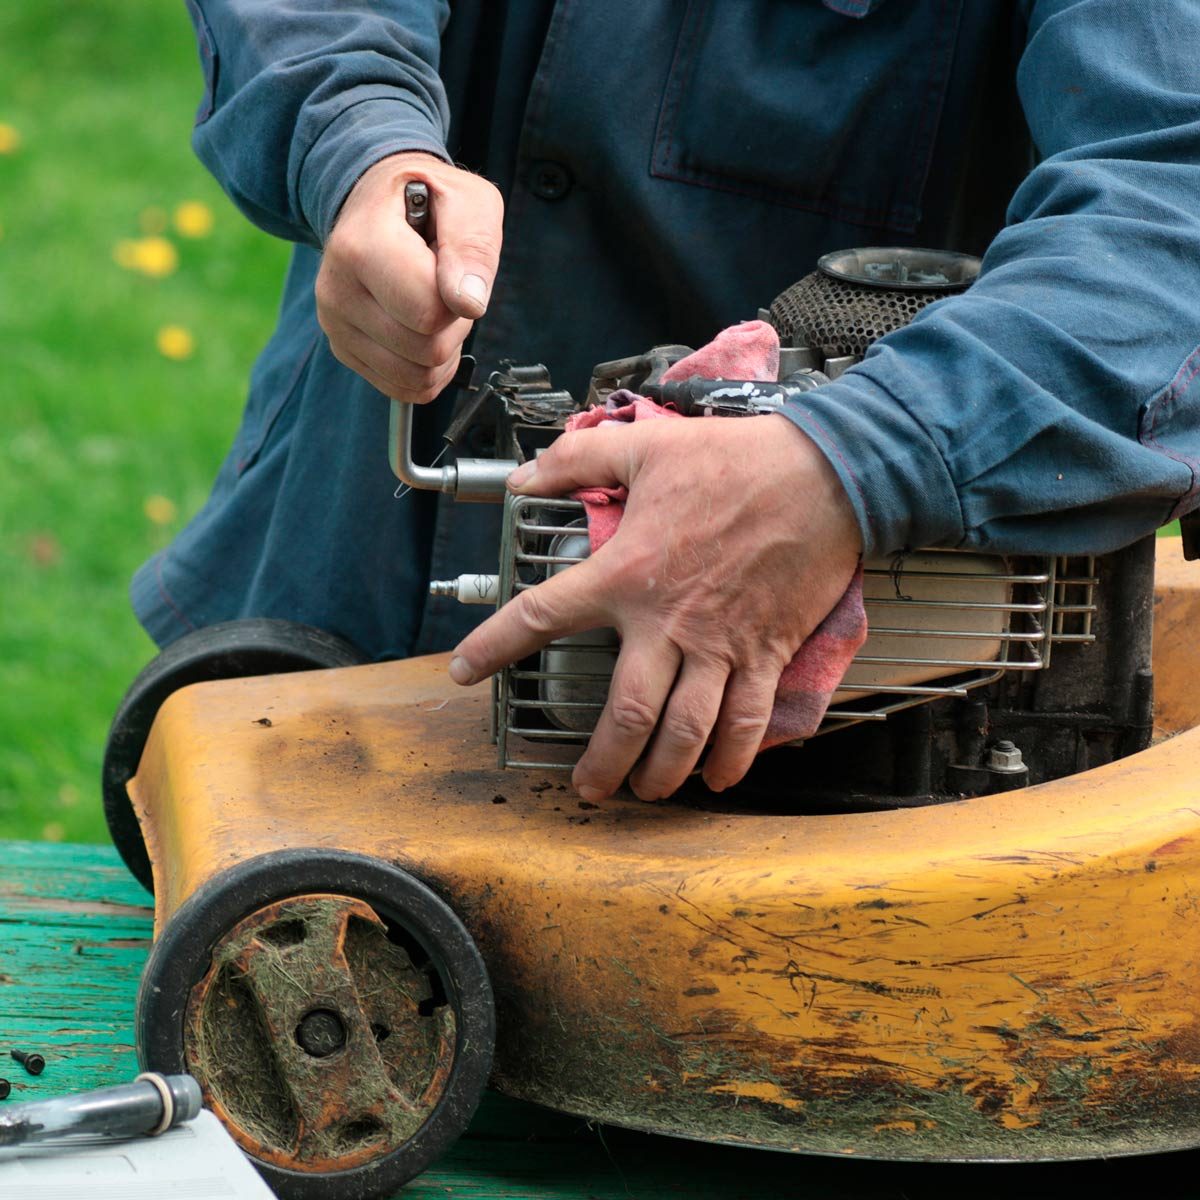 When to Replace a Lawn Mower vs. Repairing One?